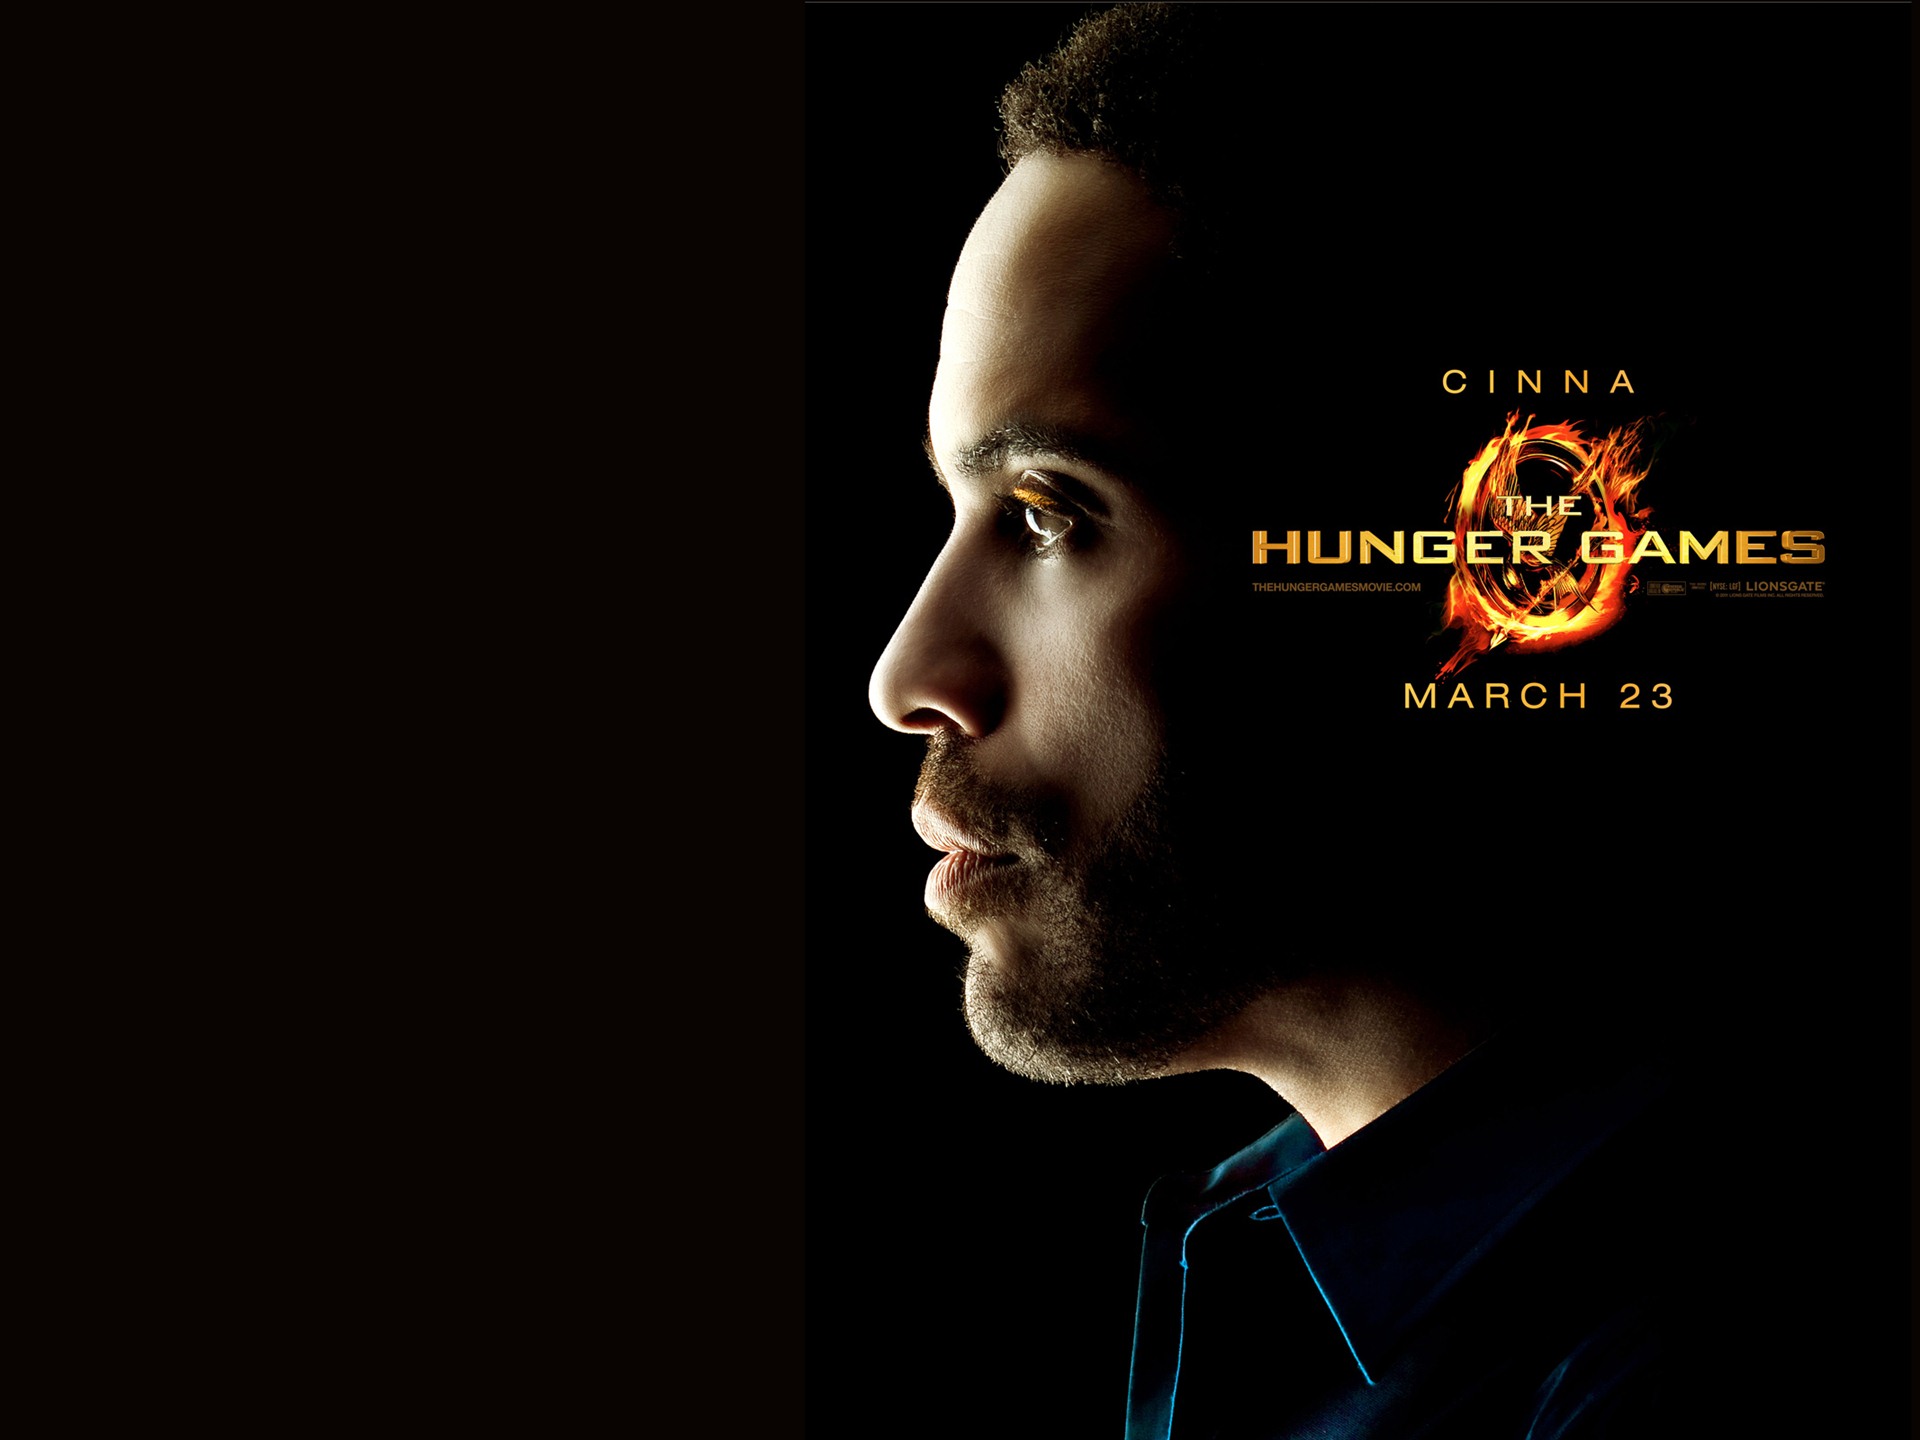 The Hunger Games HD wallpapers #11 - 1920x1440